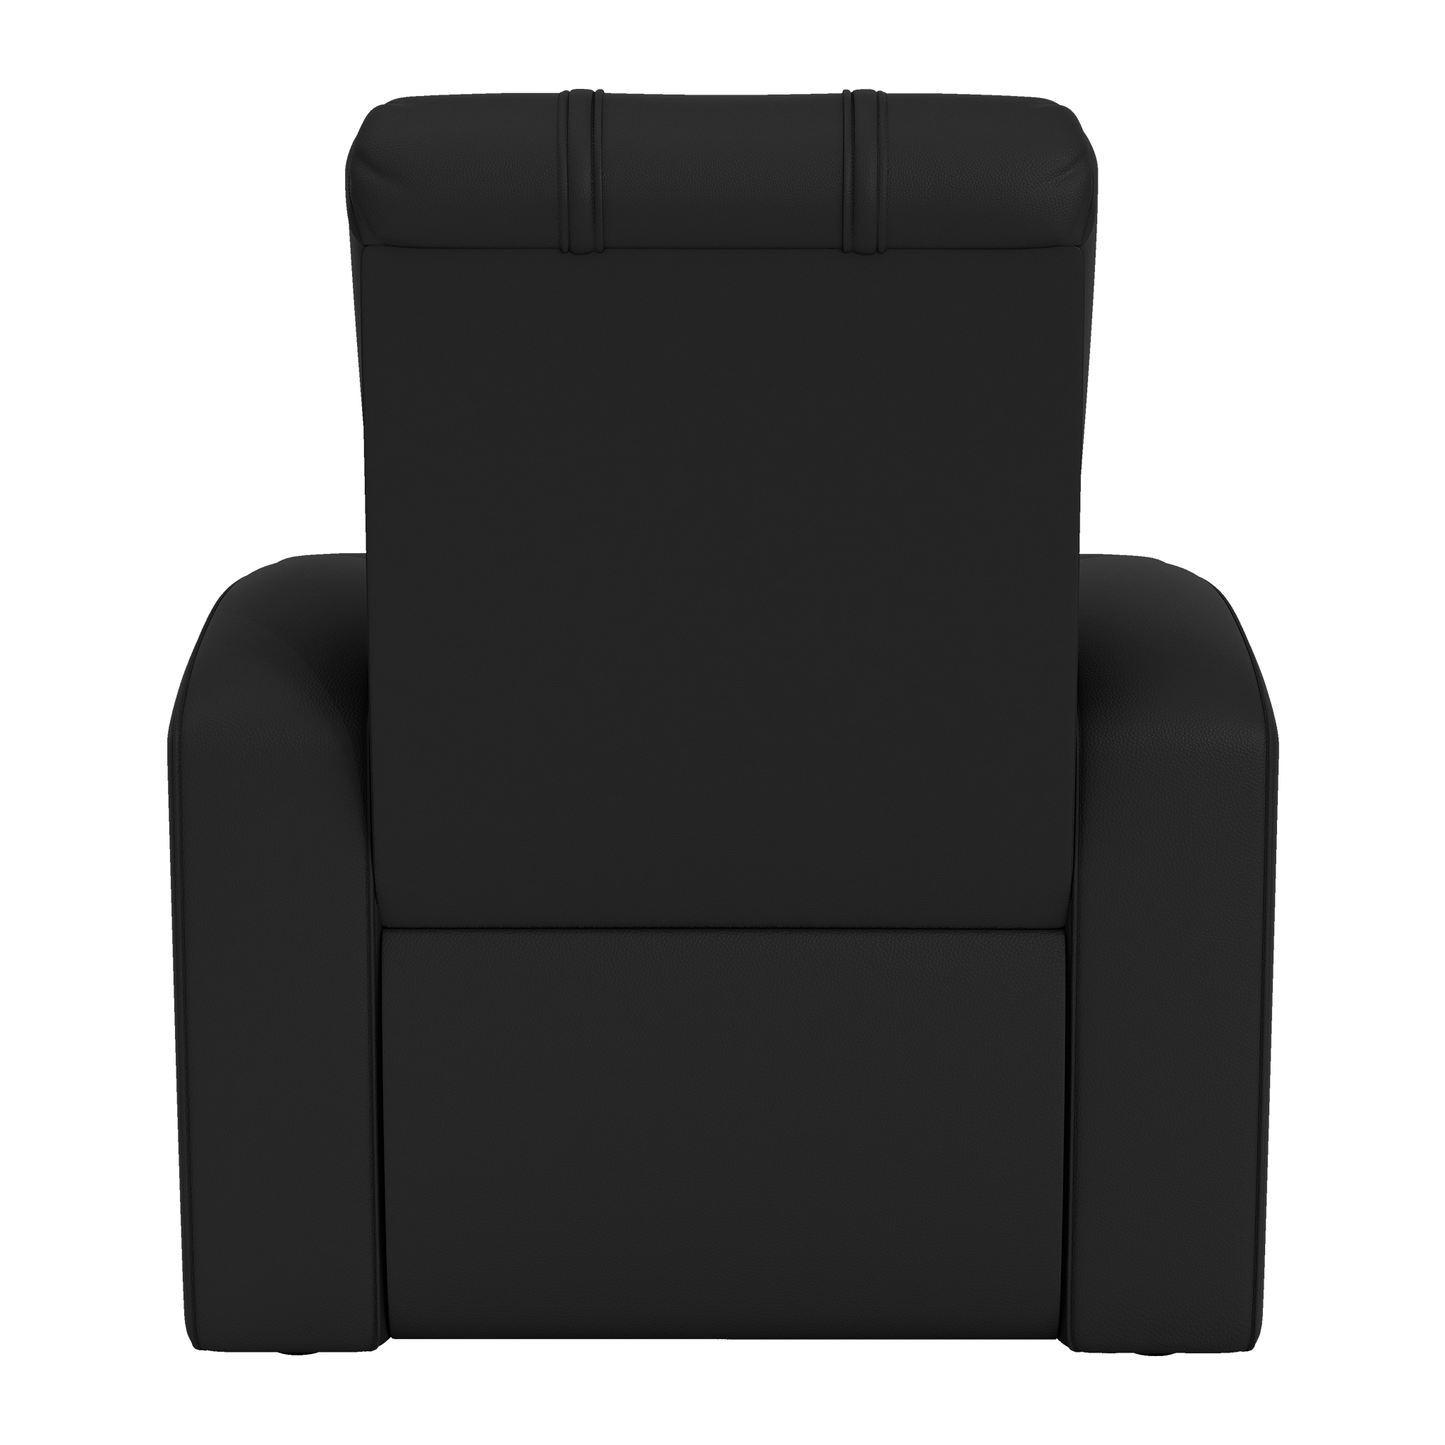 Relax Home Theater Recliner with Colorado Avalanche 2022 Champions Logo